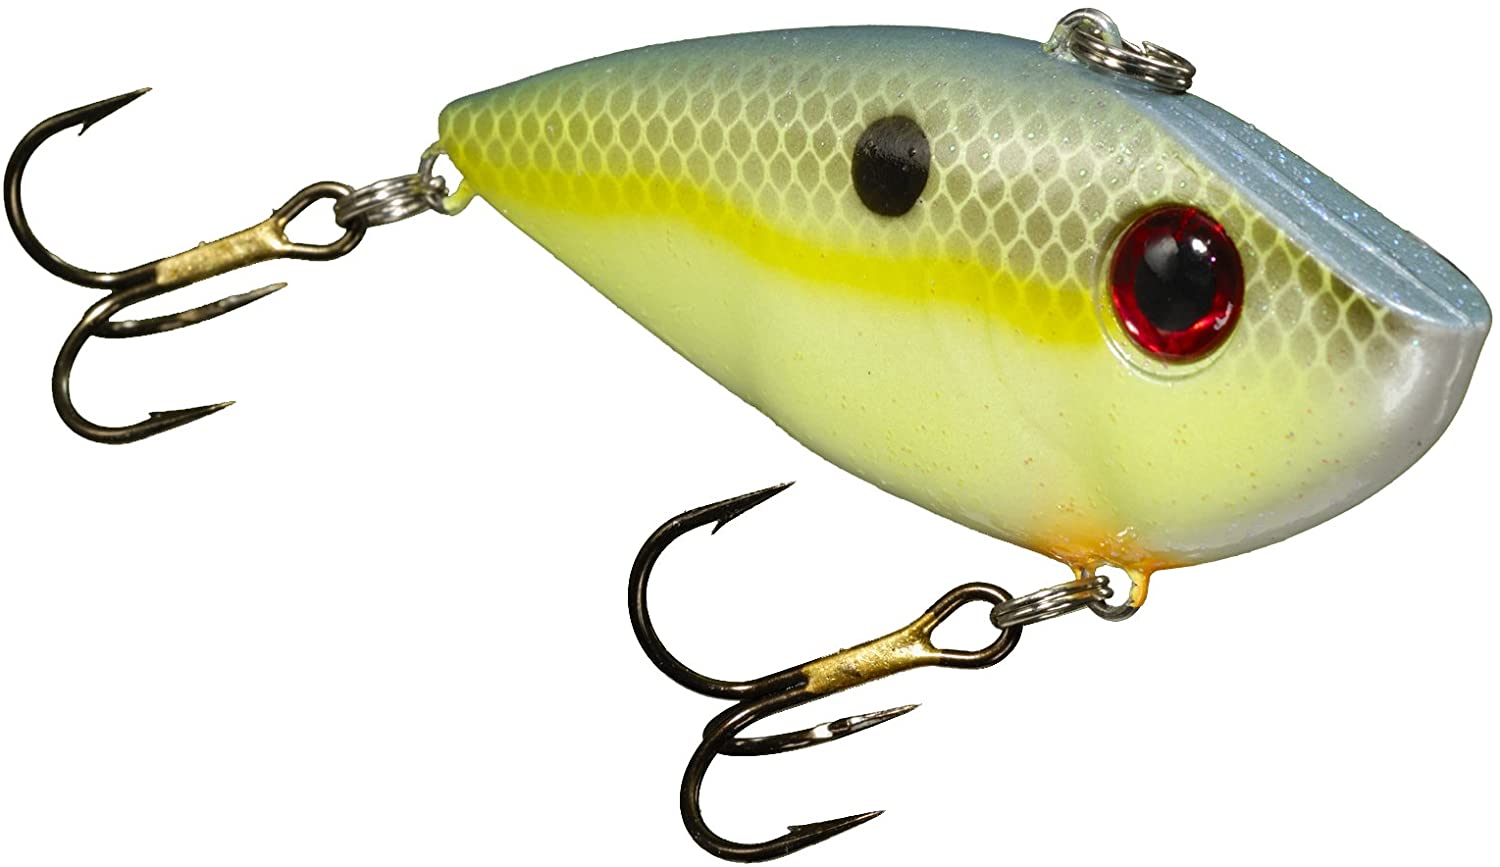 Strike King Red Eyed Shad 1/4oz Lipless Crankbaits - Chartreuse Sexy Shad